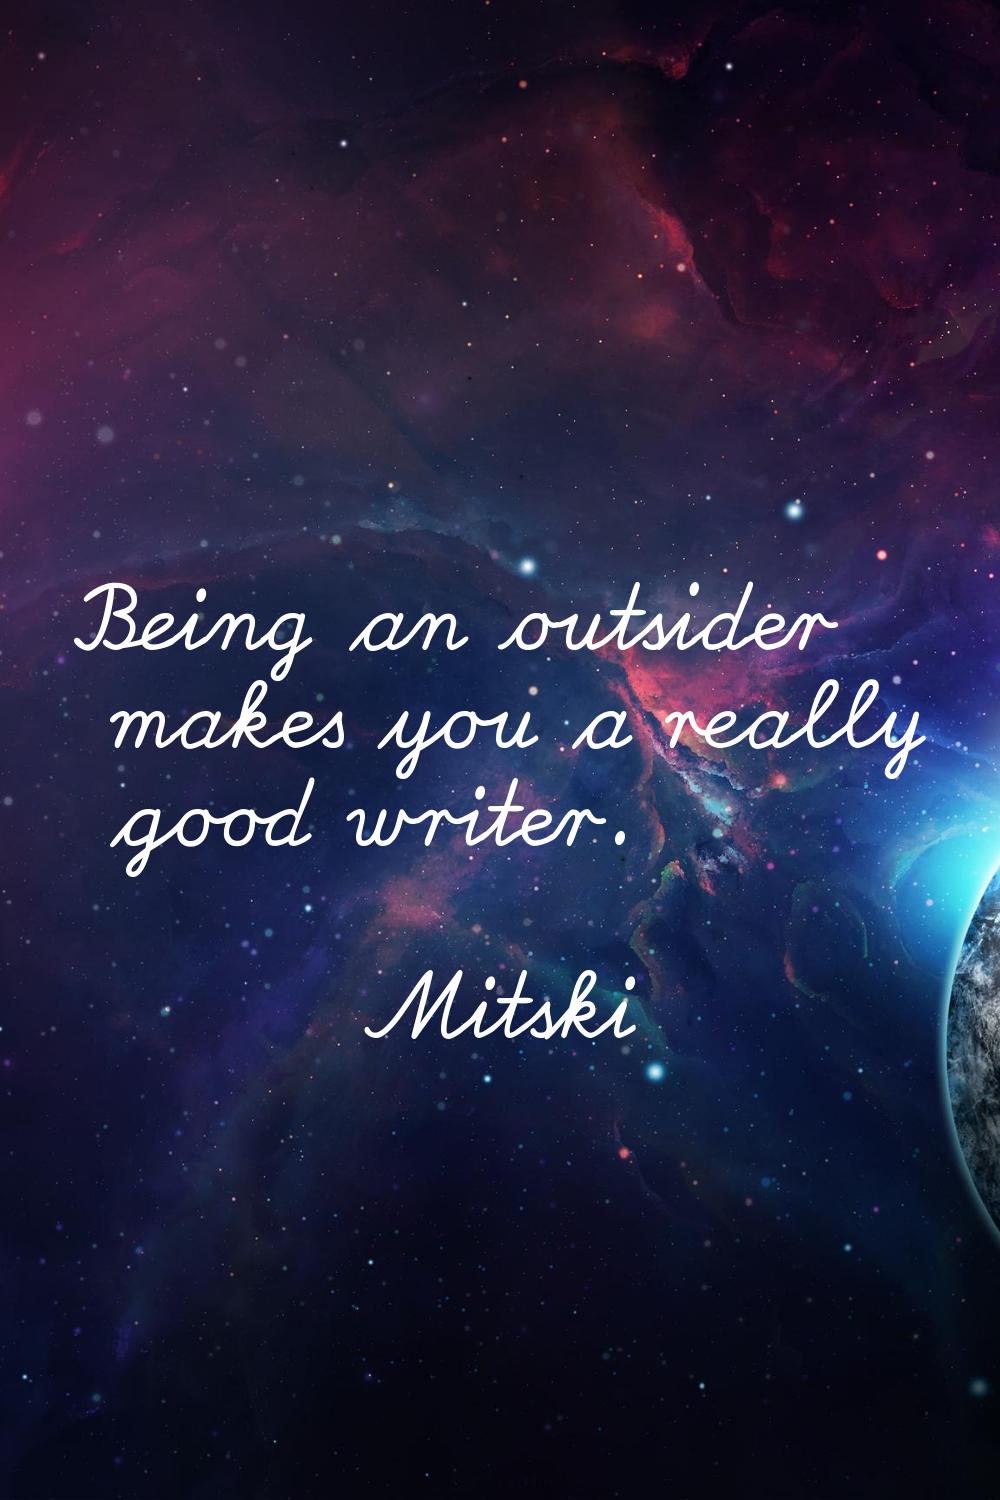 Being an outsider makes you a really good writer.